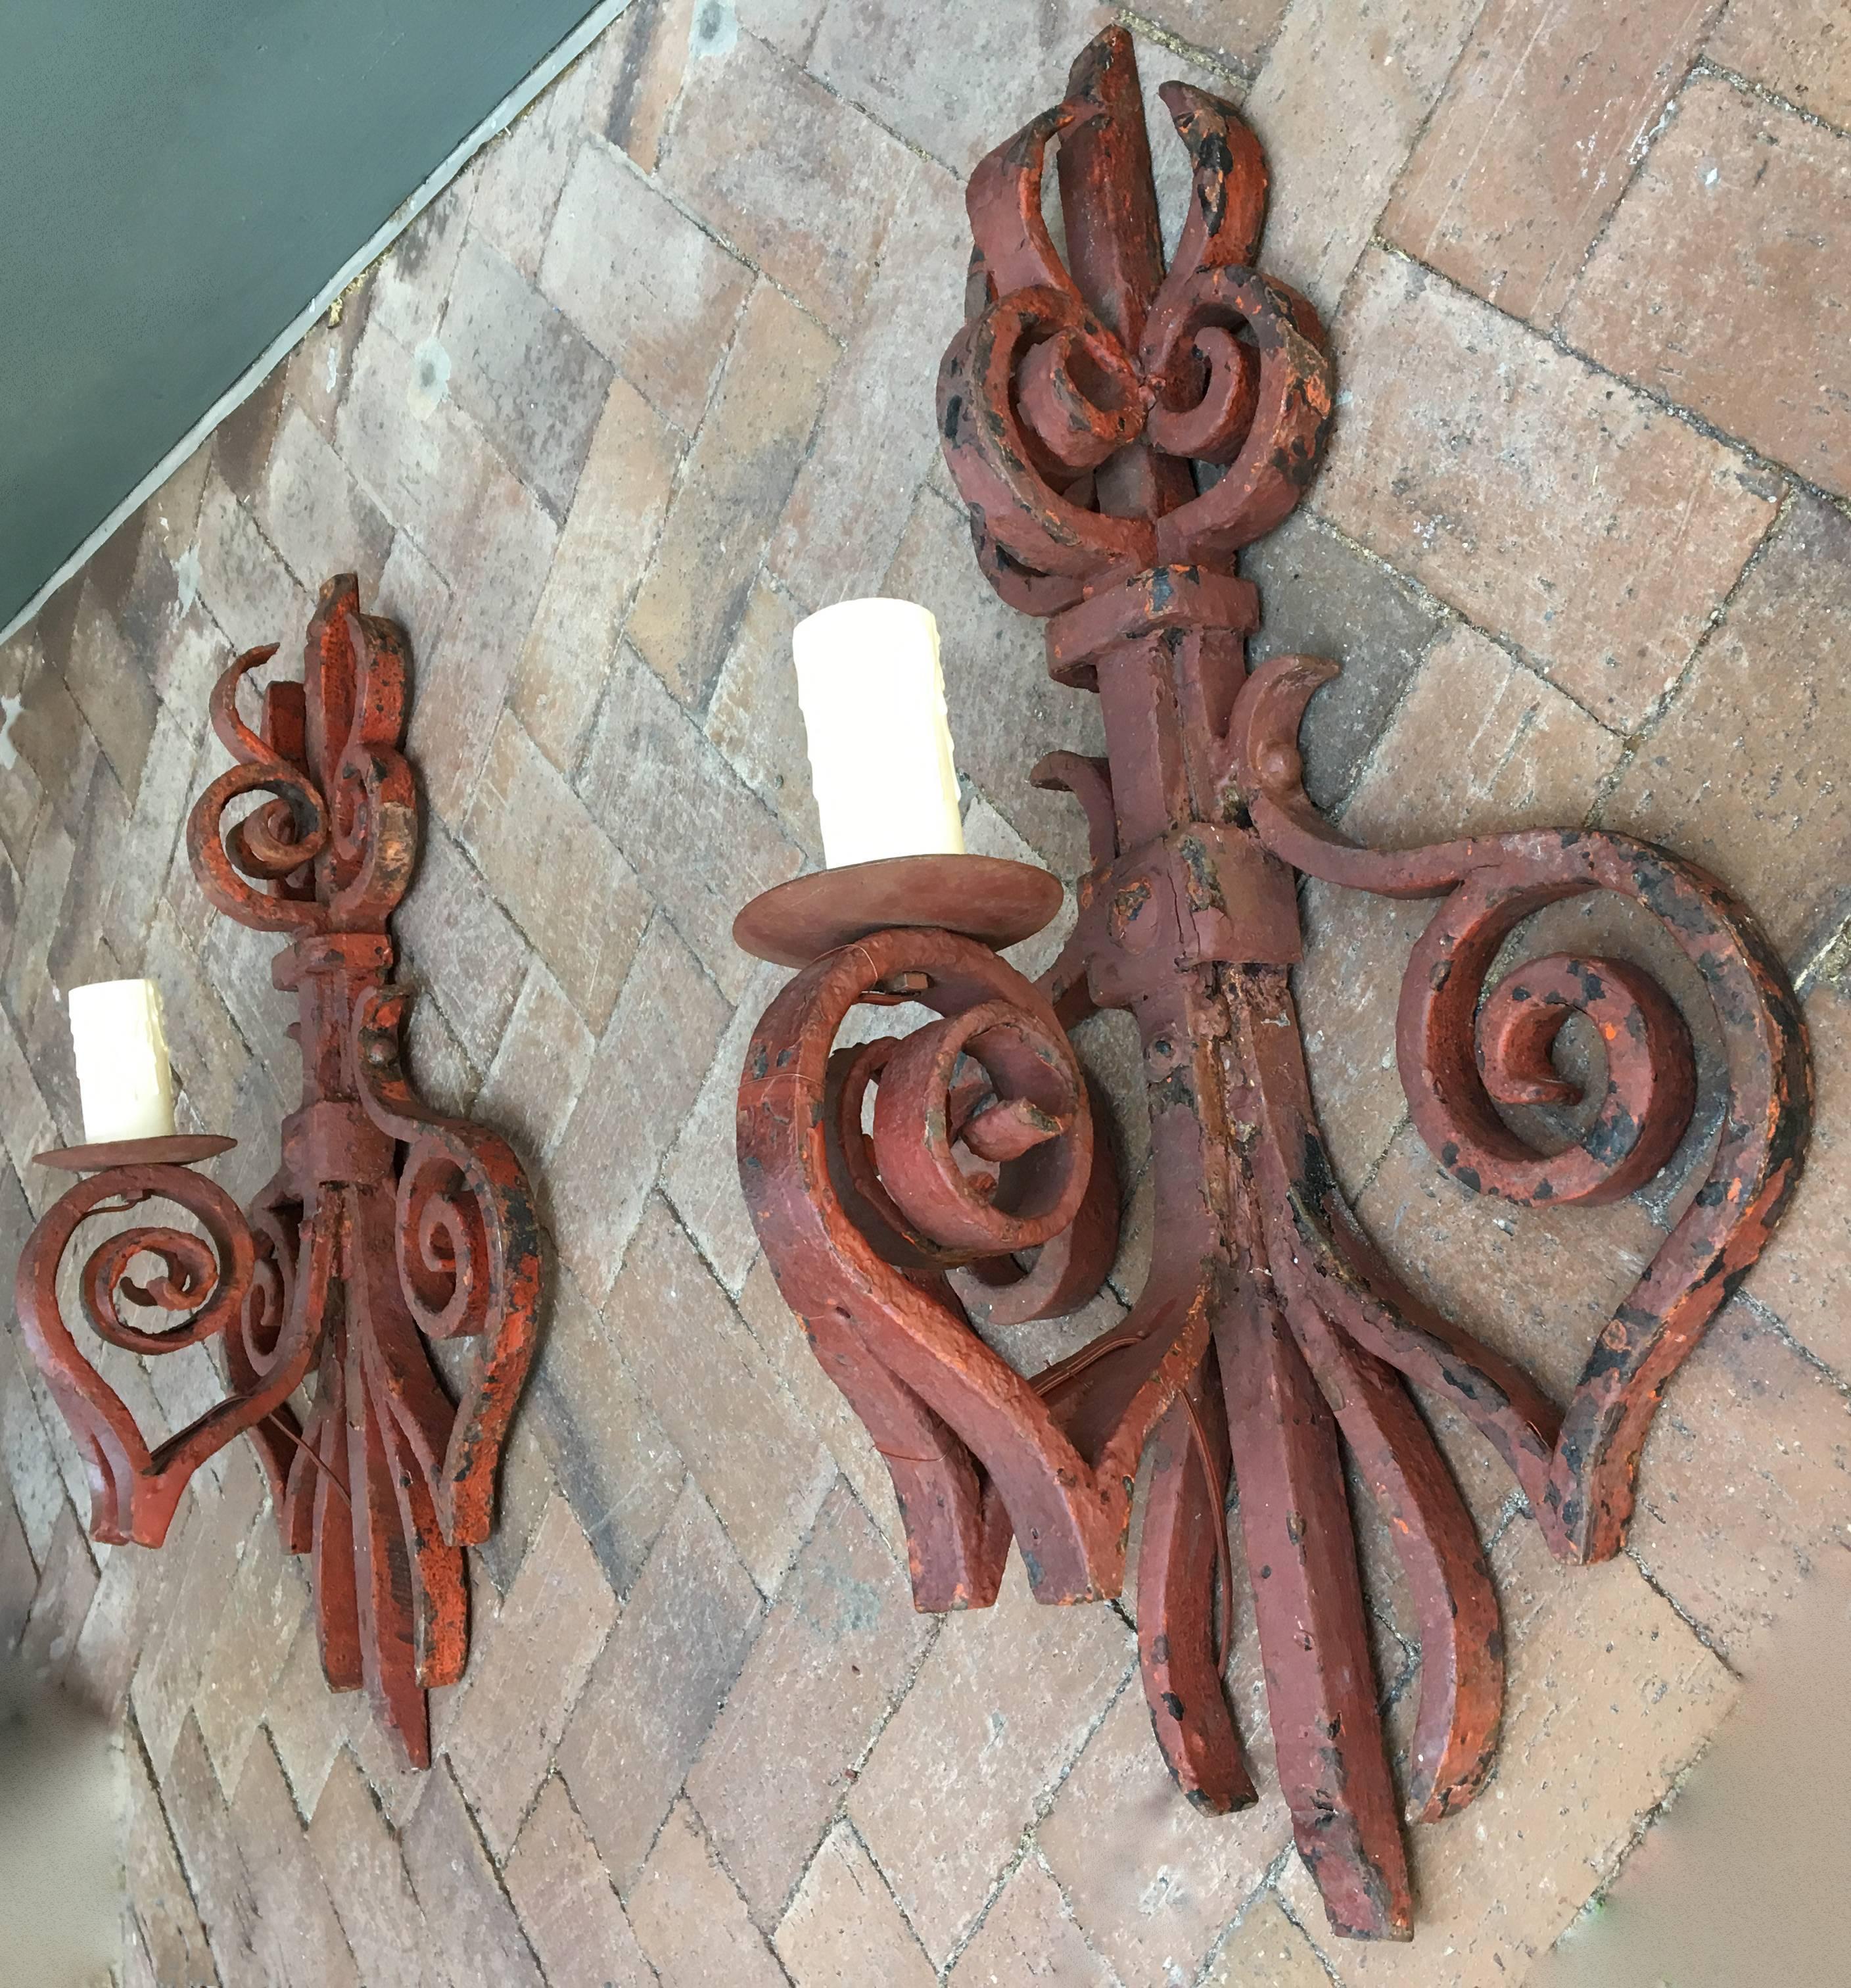 These early 19th century French hand-wrought iron brackets were made into sconces. At 29